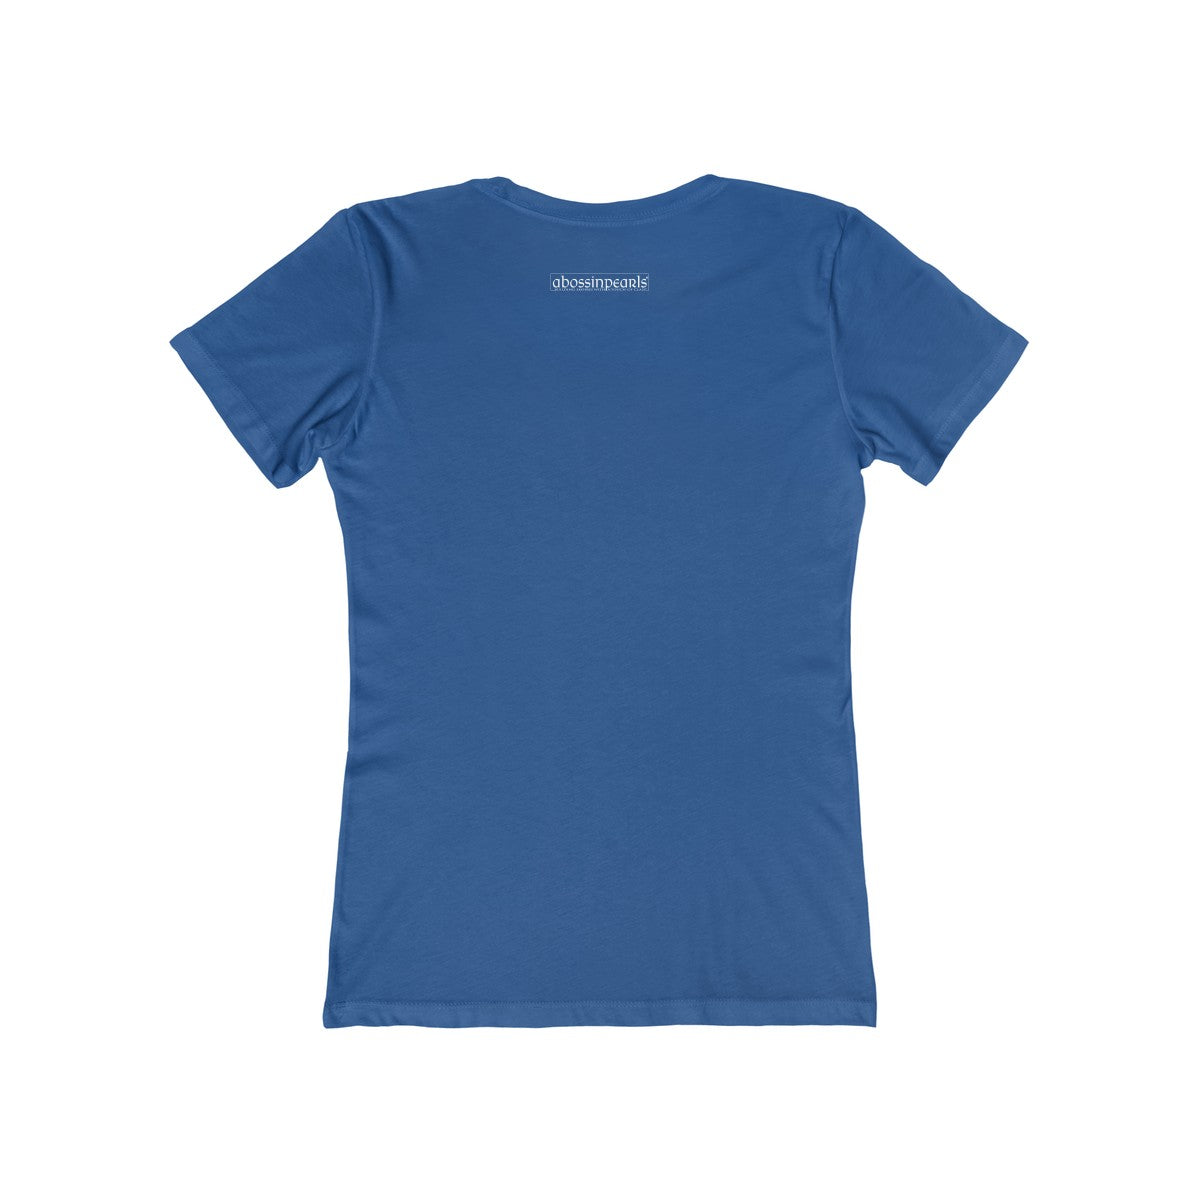 Clean Beauty Nation Tee (Various Colors)